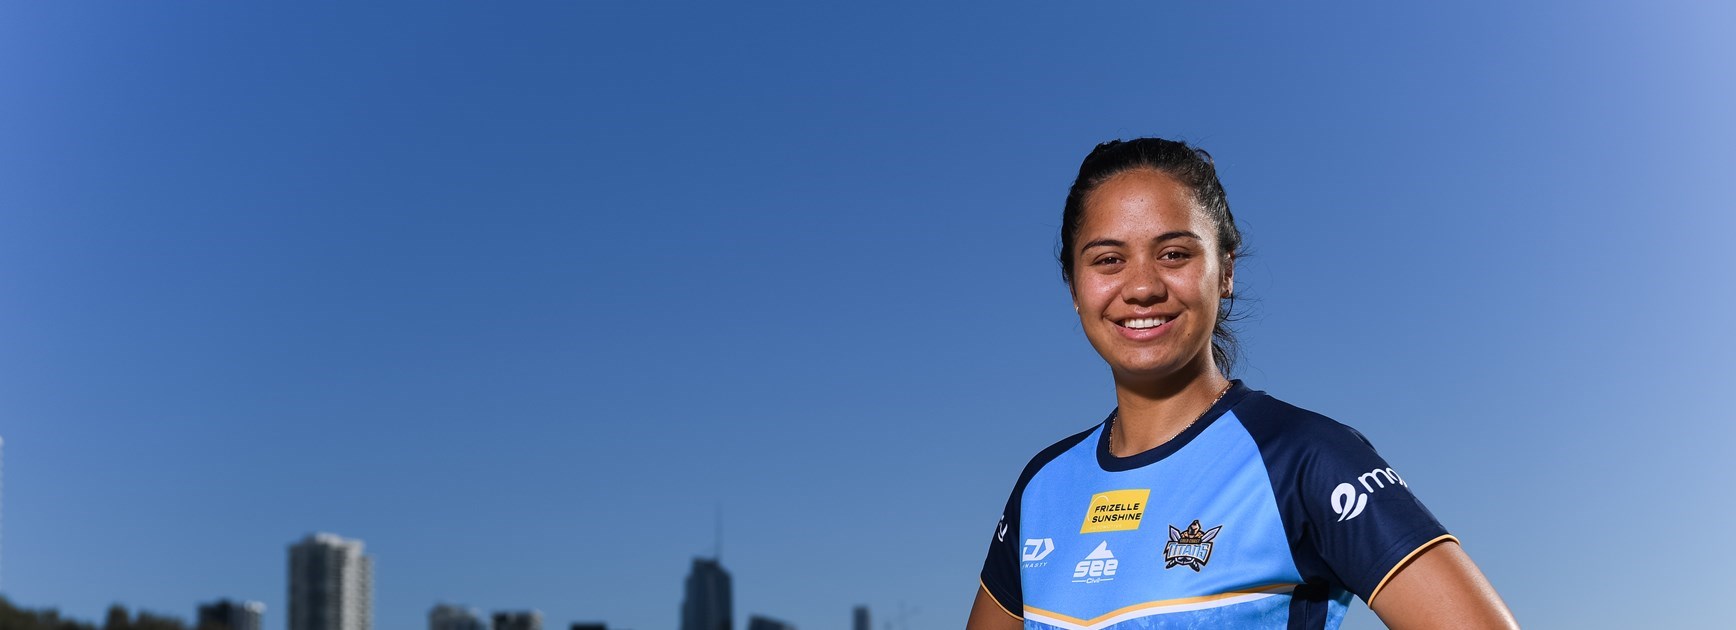 Hansen confident she can claim halfback role in 2022